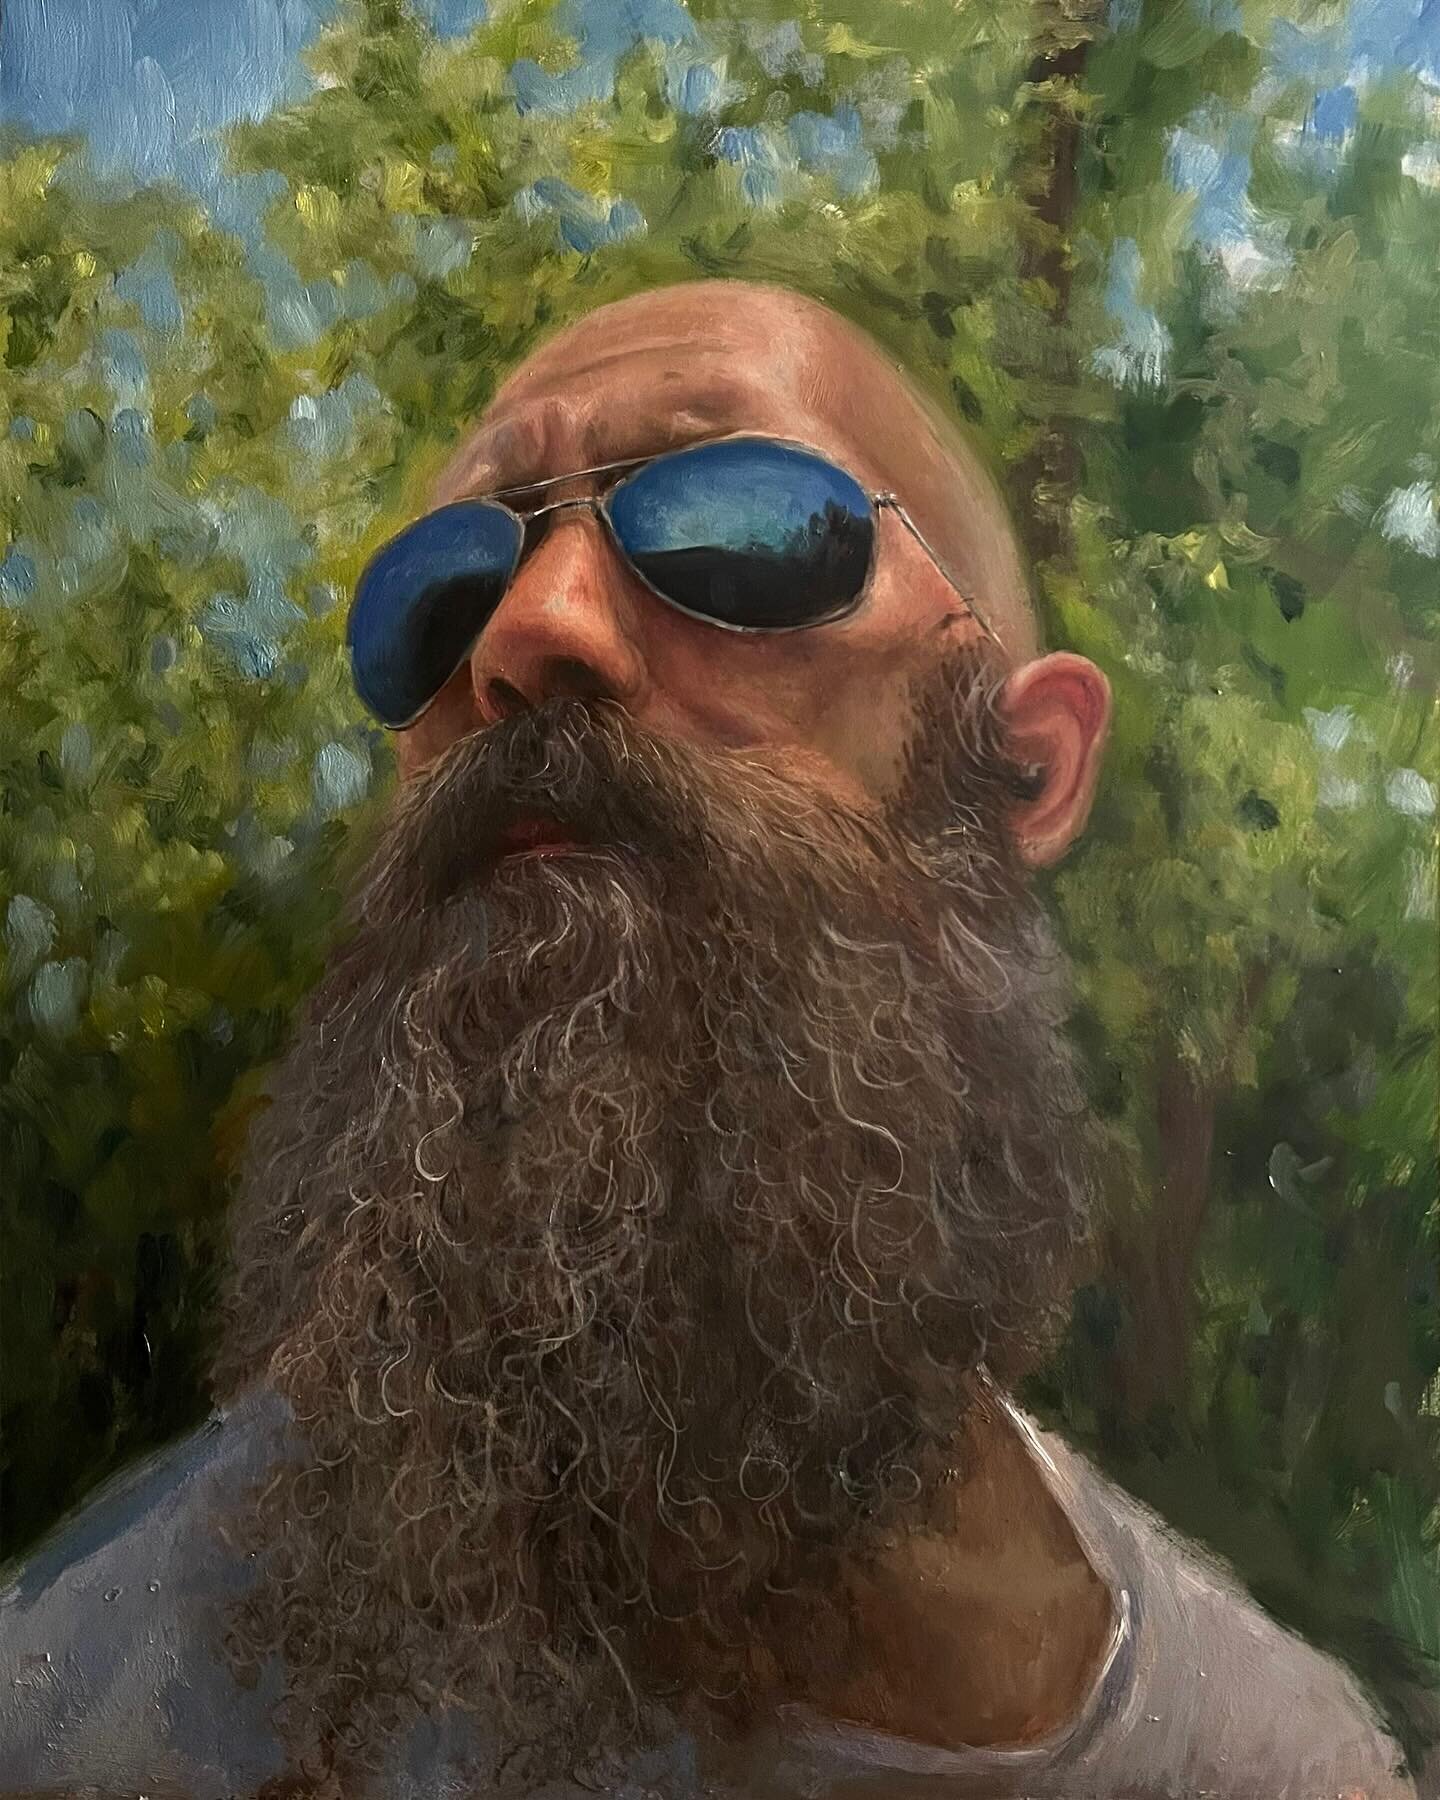 Portrait of Rick, 2023

Oil on panel
20 &times; 16 in | 50.8 &times; 40.6 cm

This piece is available through @33contemporary on @artsy 

Want to learn more about this work?
Comment RICK and I can send you the Artsy link!

#art #artcollector #artgall